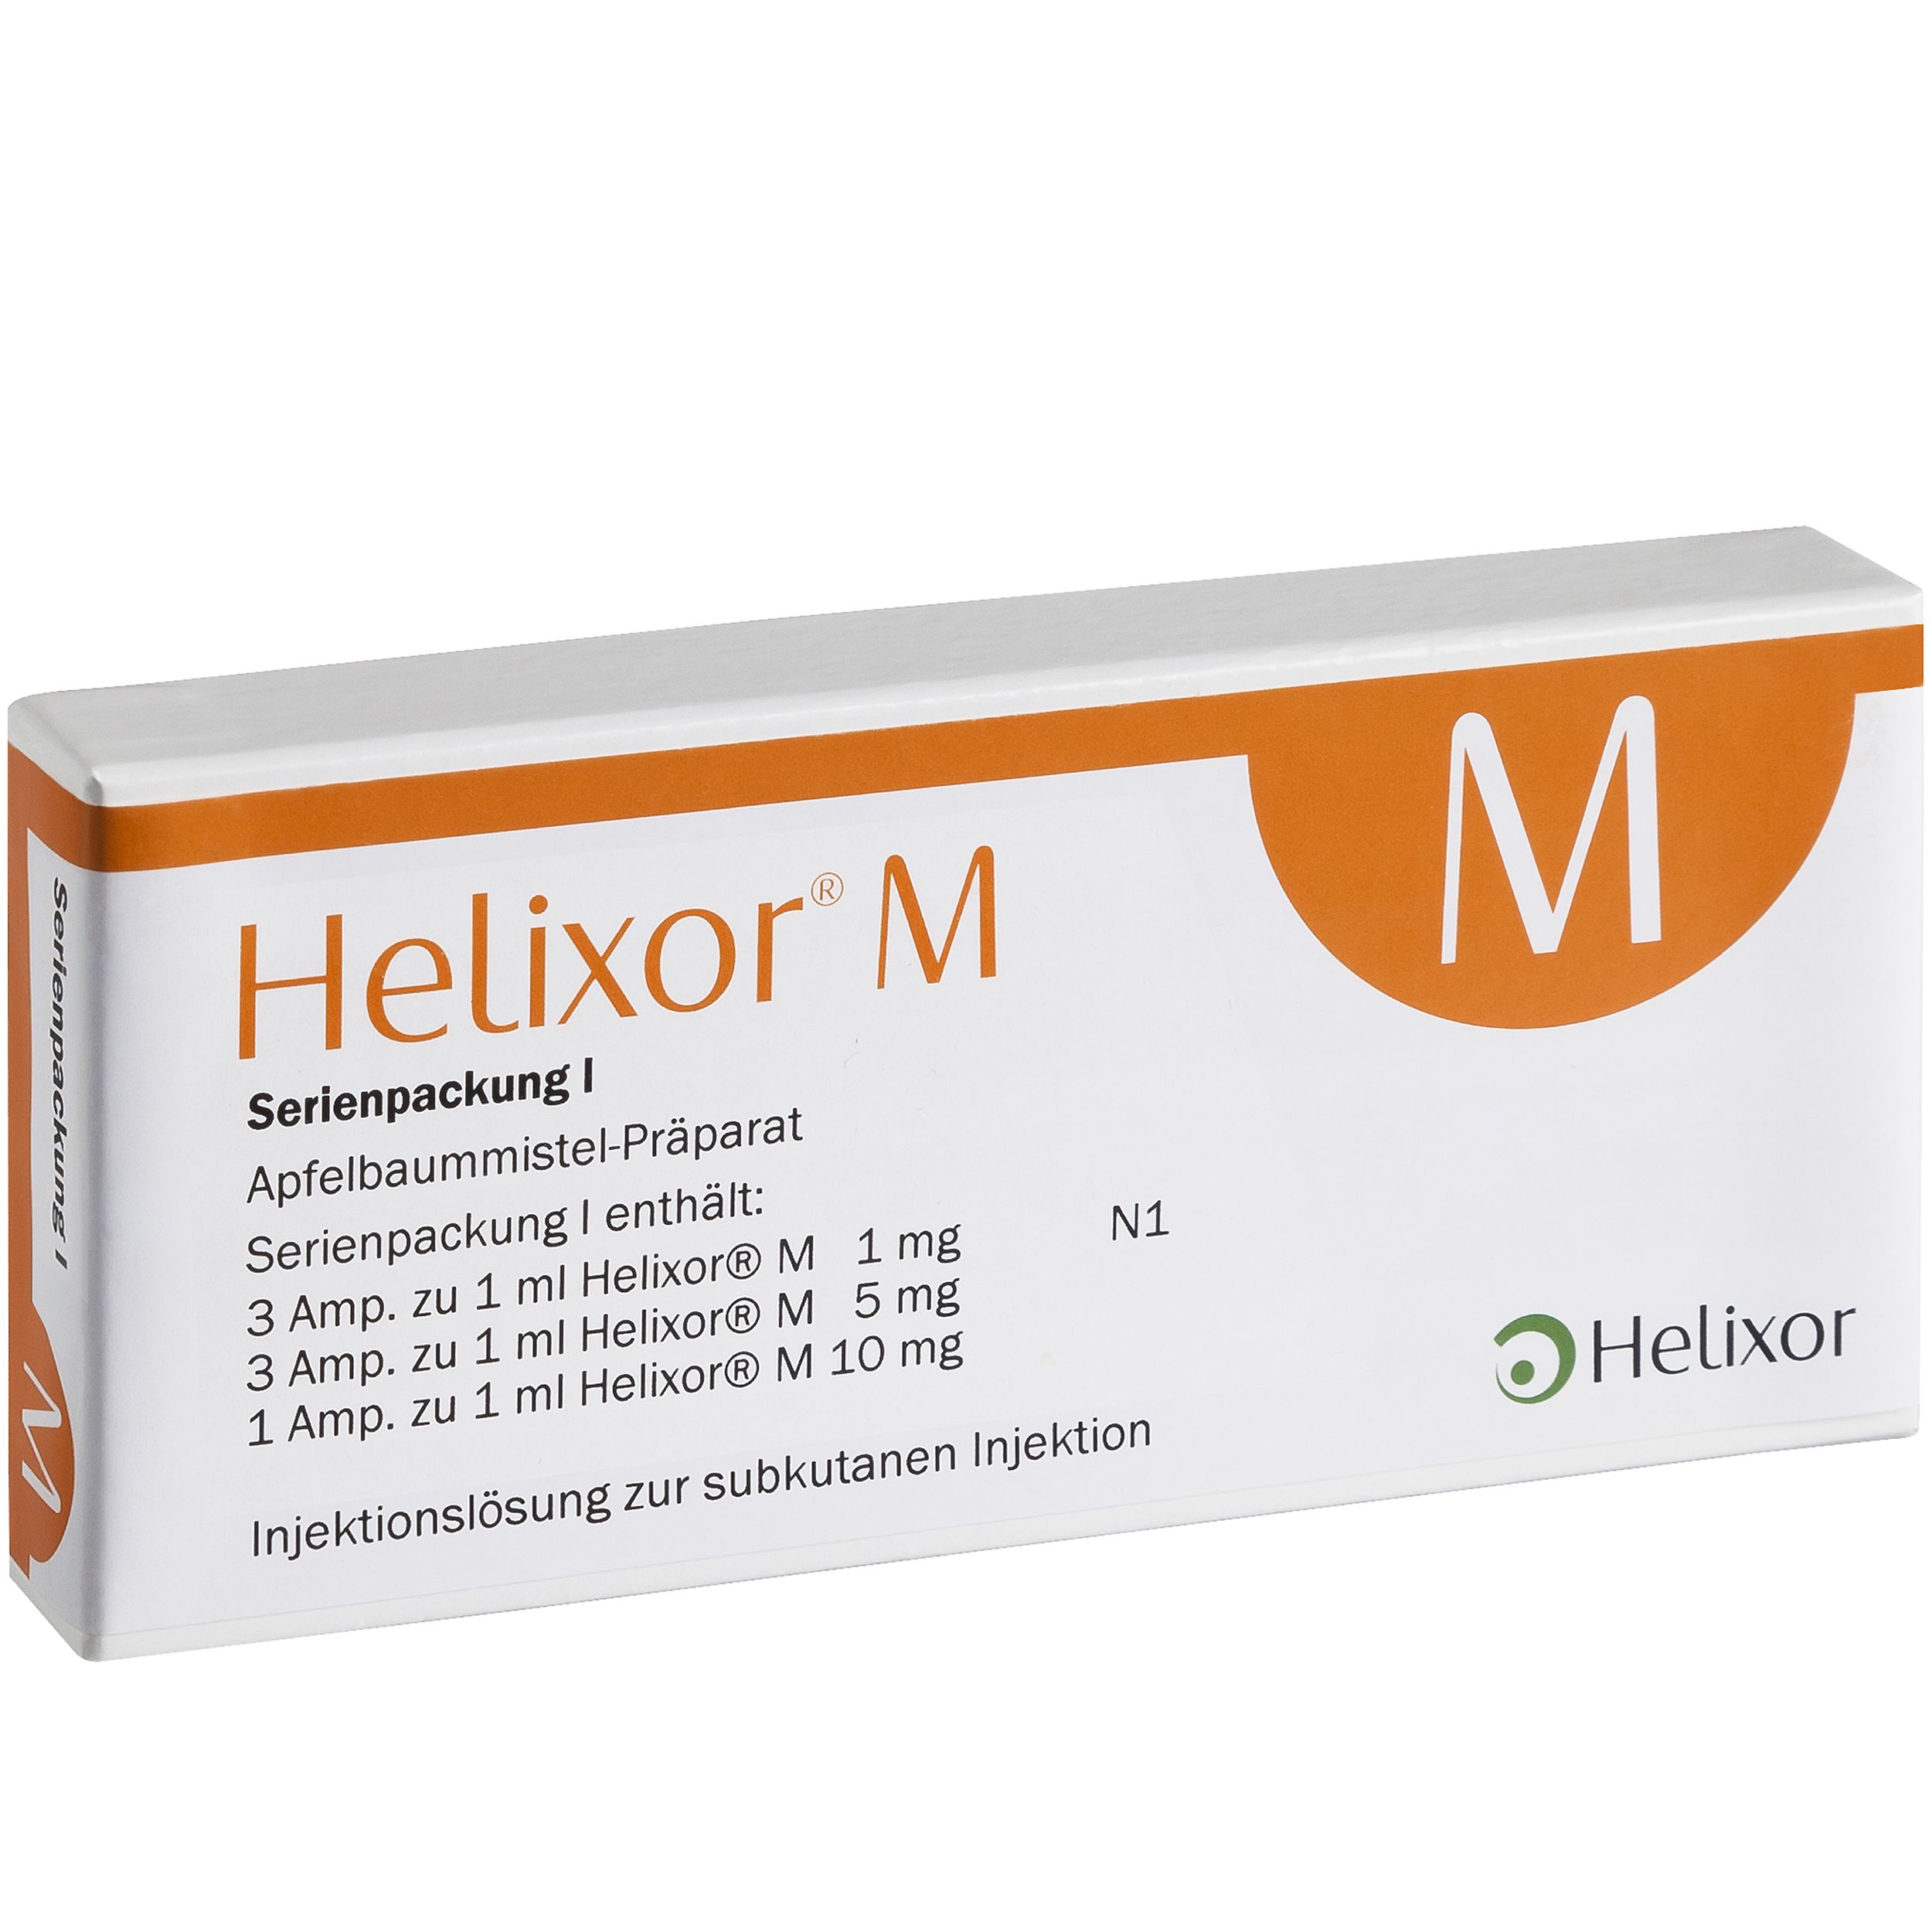 HELIXOR M series pack I ampoules